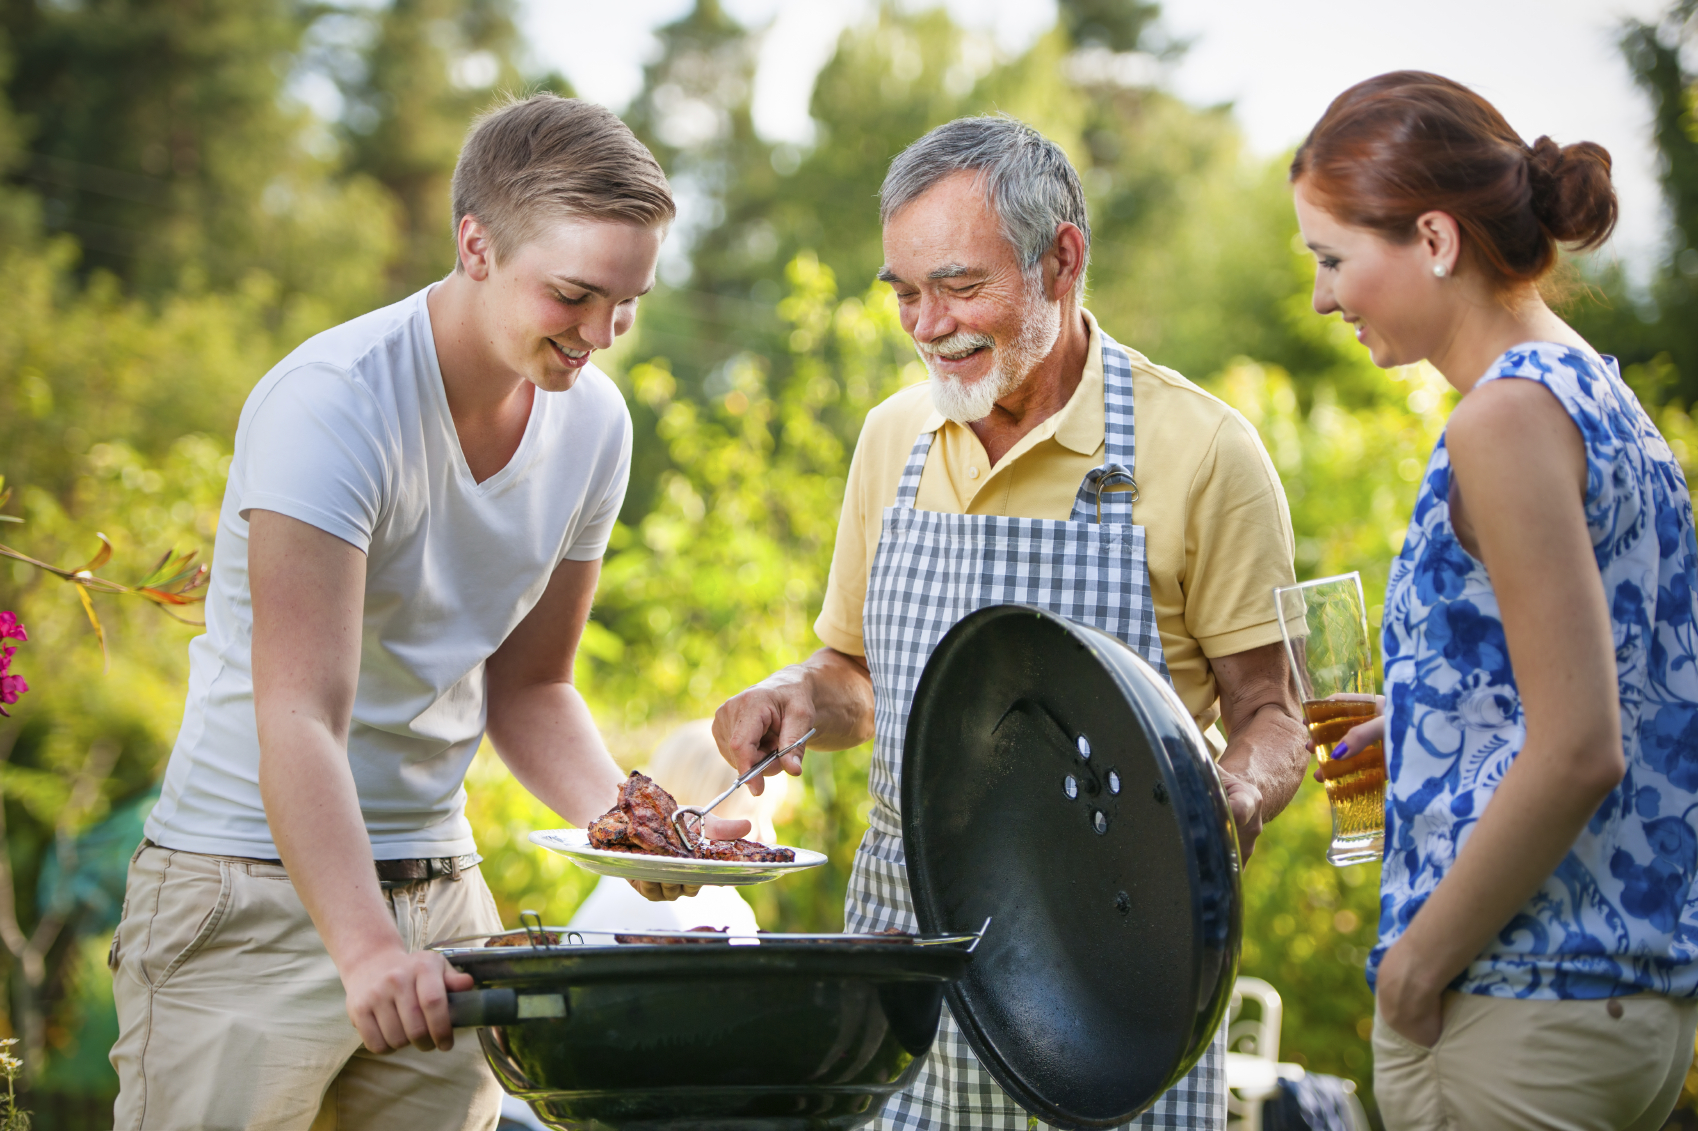 You’ve waited for it all year… But summer comes with some unexpected health dangers. Here are five ways to avoid them for your healthiest summer yet.